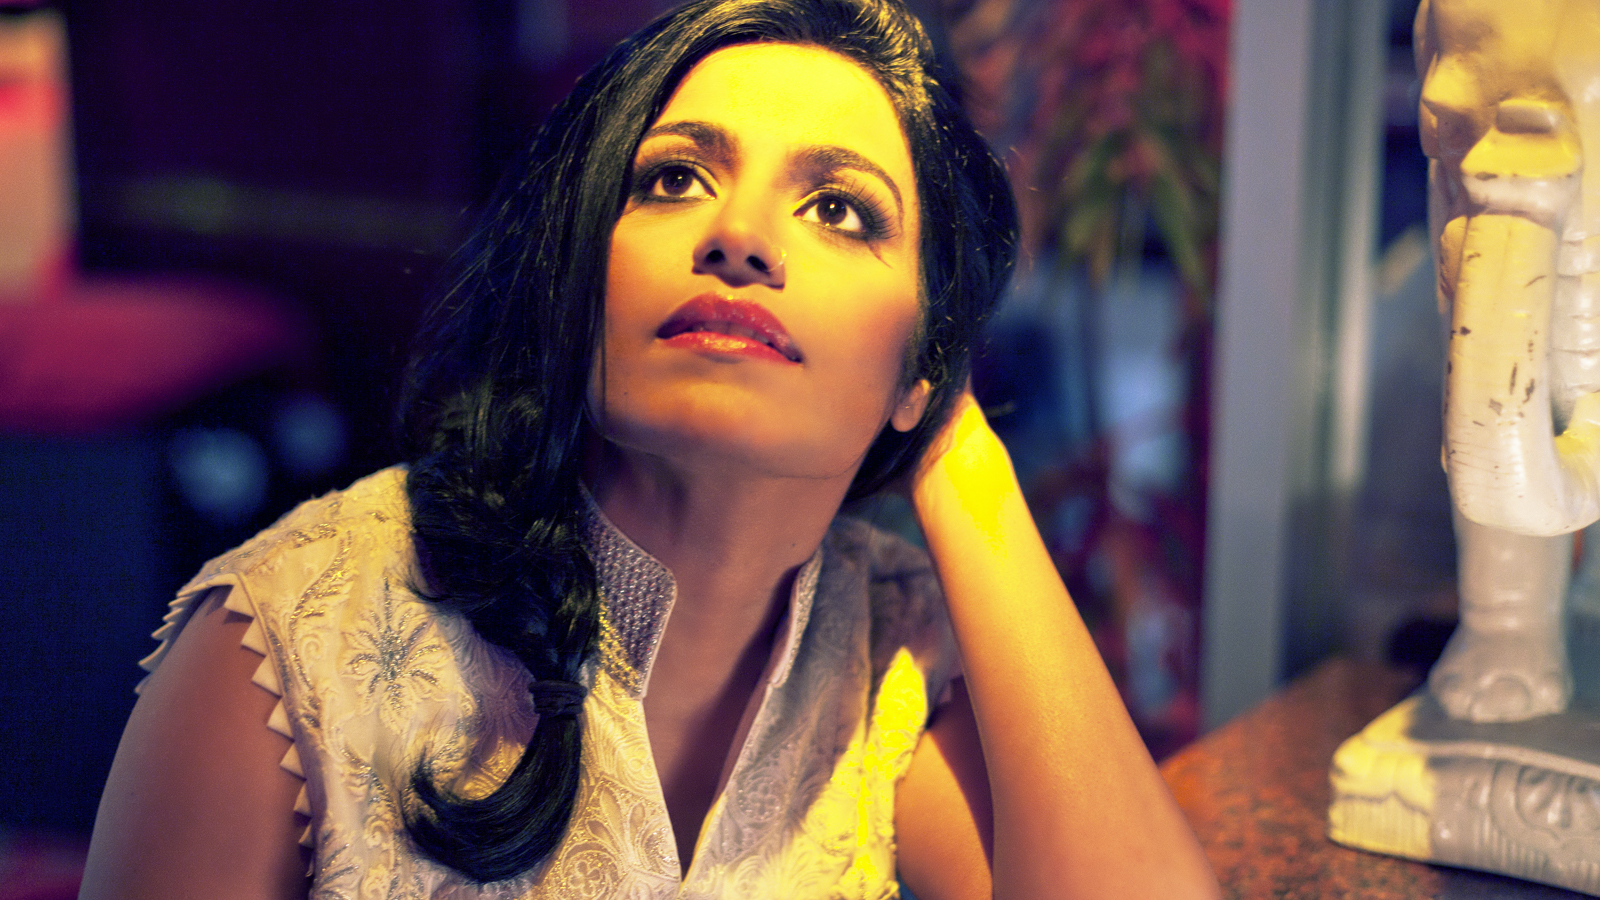 Close up of Falu wearing a white textured blouse and gazing upward. She is leaning with one arm on a table next to a white elephant statue.